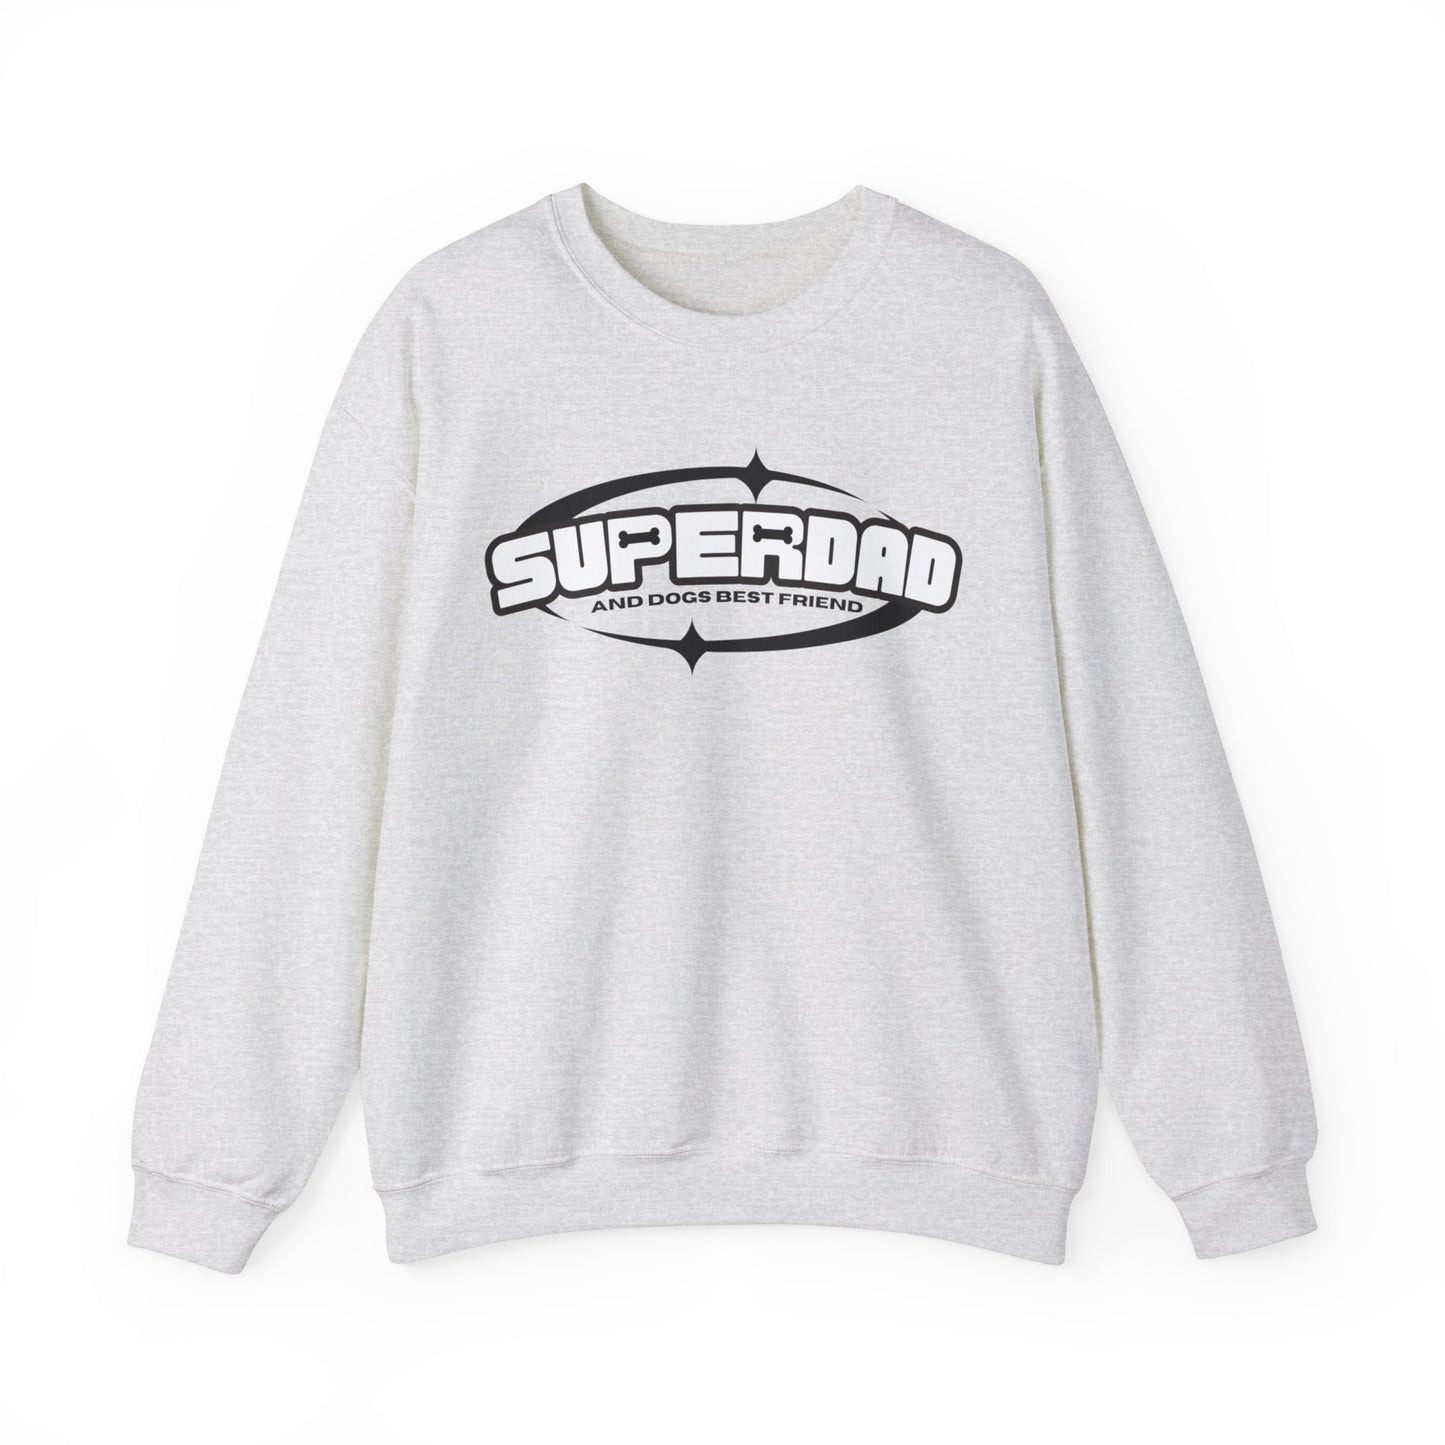  Displaying an ash color unisex sweatshirt from Dogs Pure Love with the "Superdad" print, against a white backdrop.